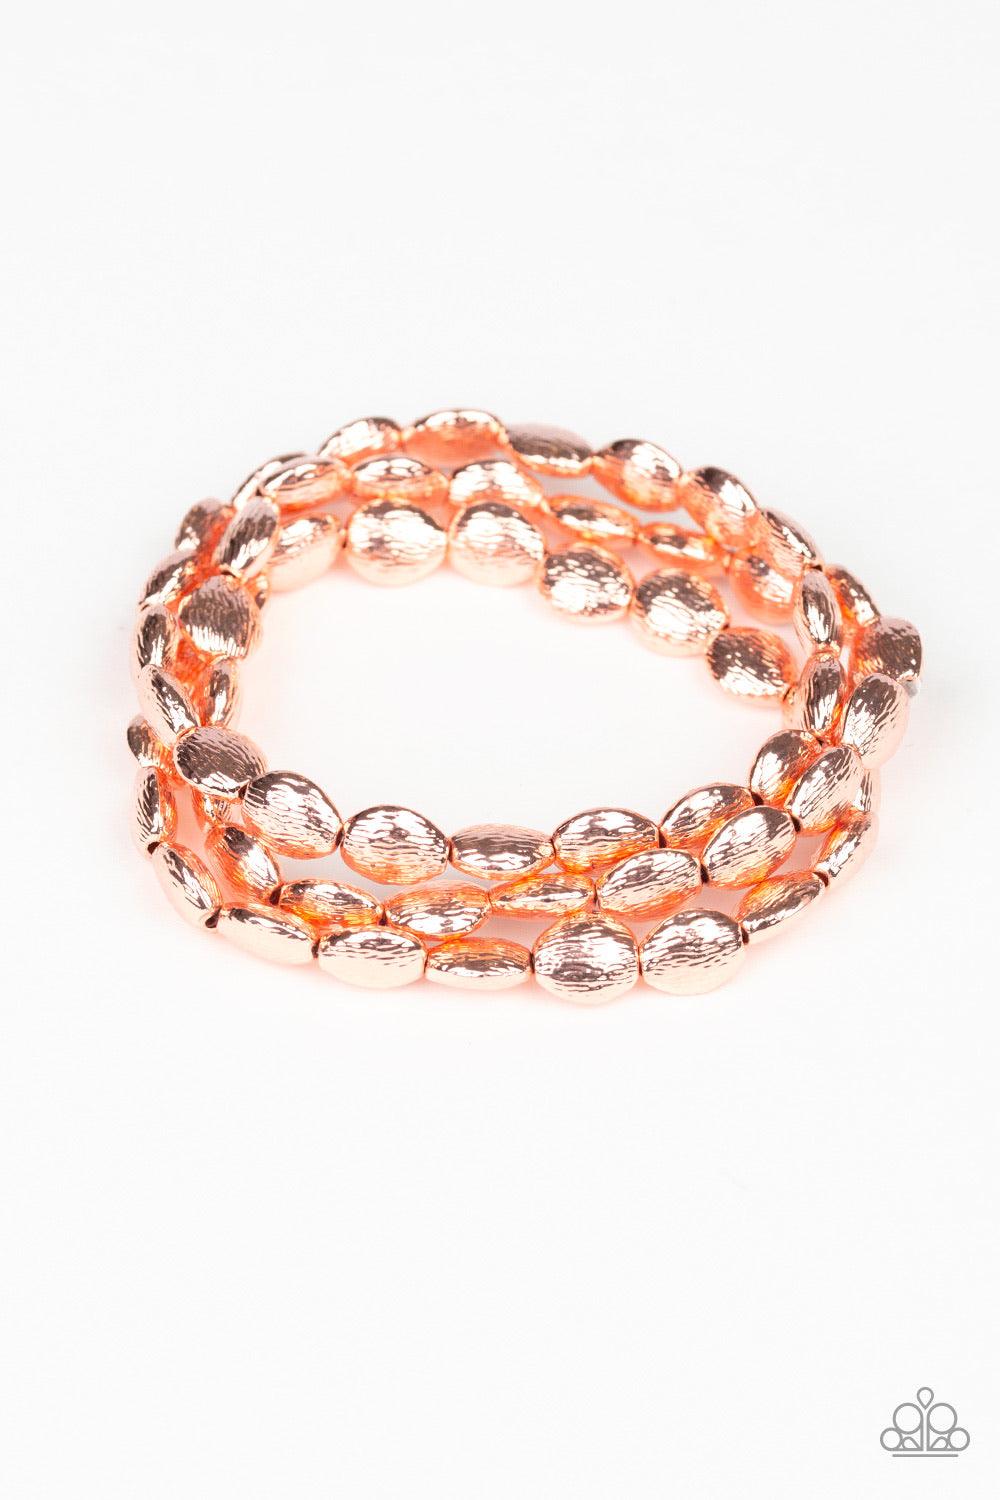 Paparazzi Accessories Basic Bliss - Copper Radiating with shimmery textures, dainty shiny copper beads are threaded along stretchy bands around the wrist for a casually layered look. Sold as one set of three bracelets. Jewelry